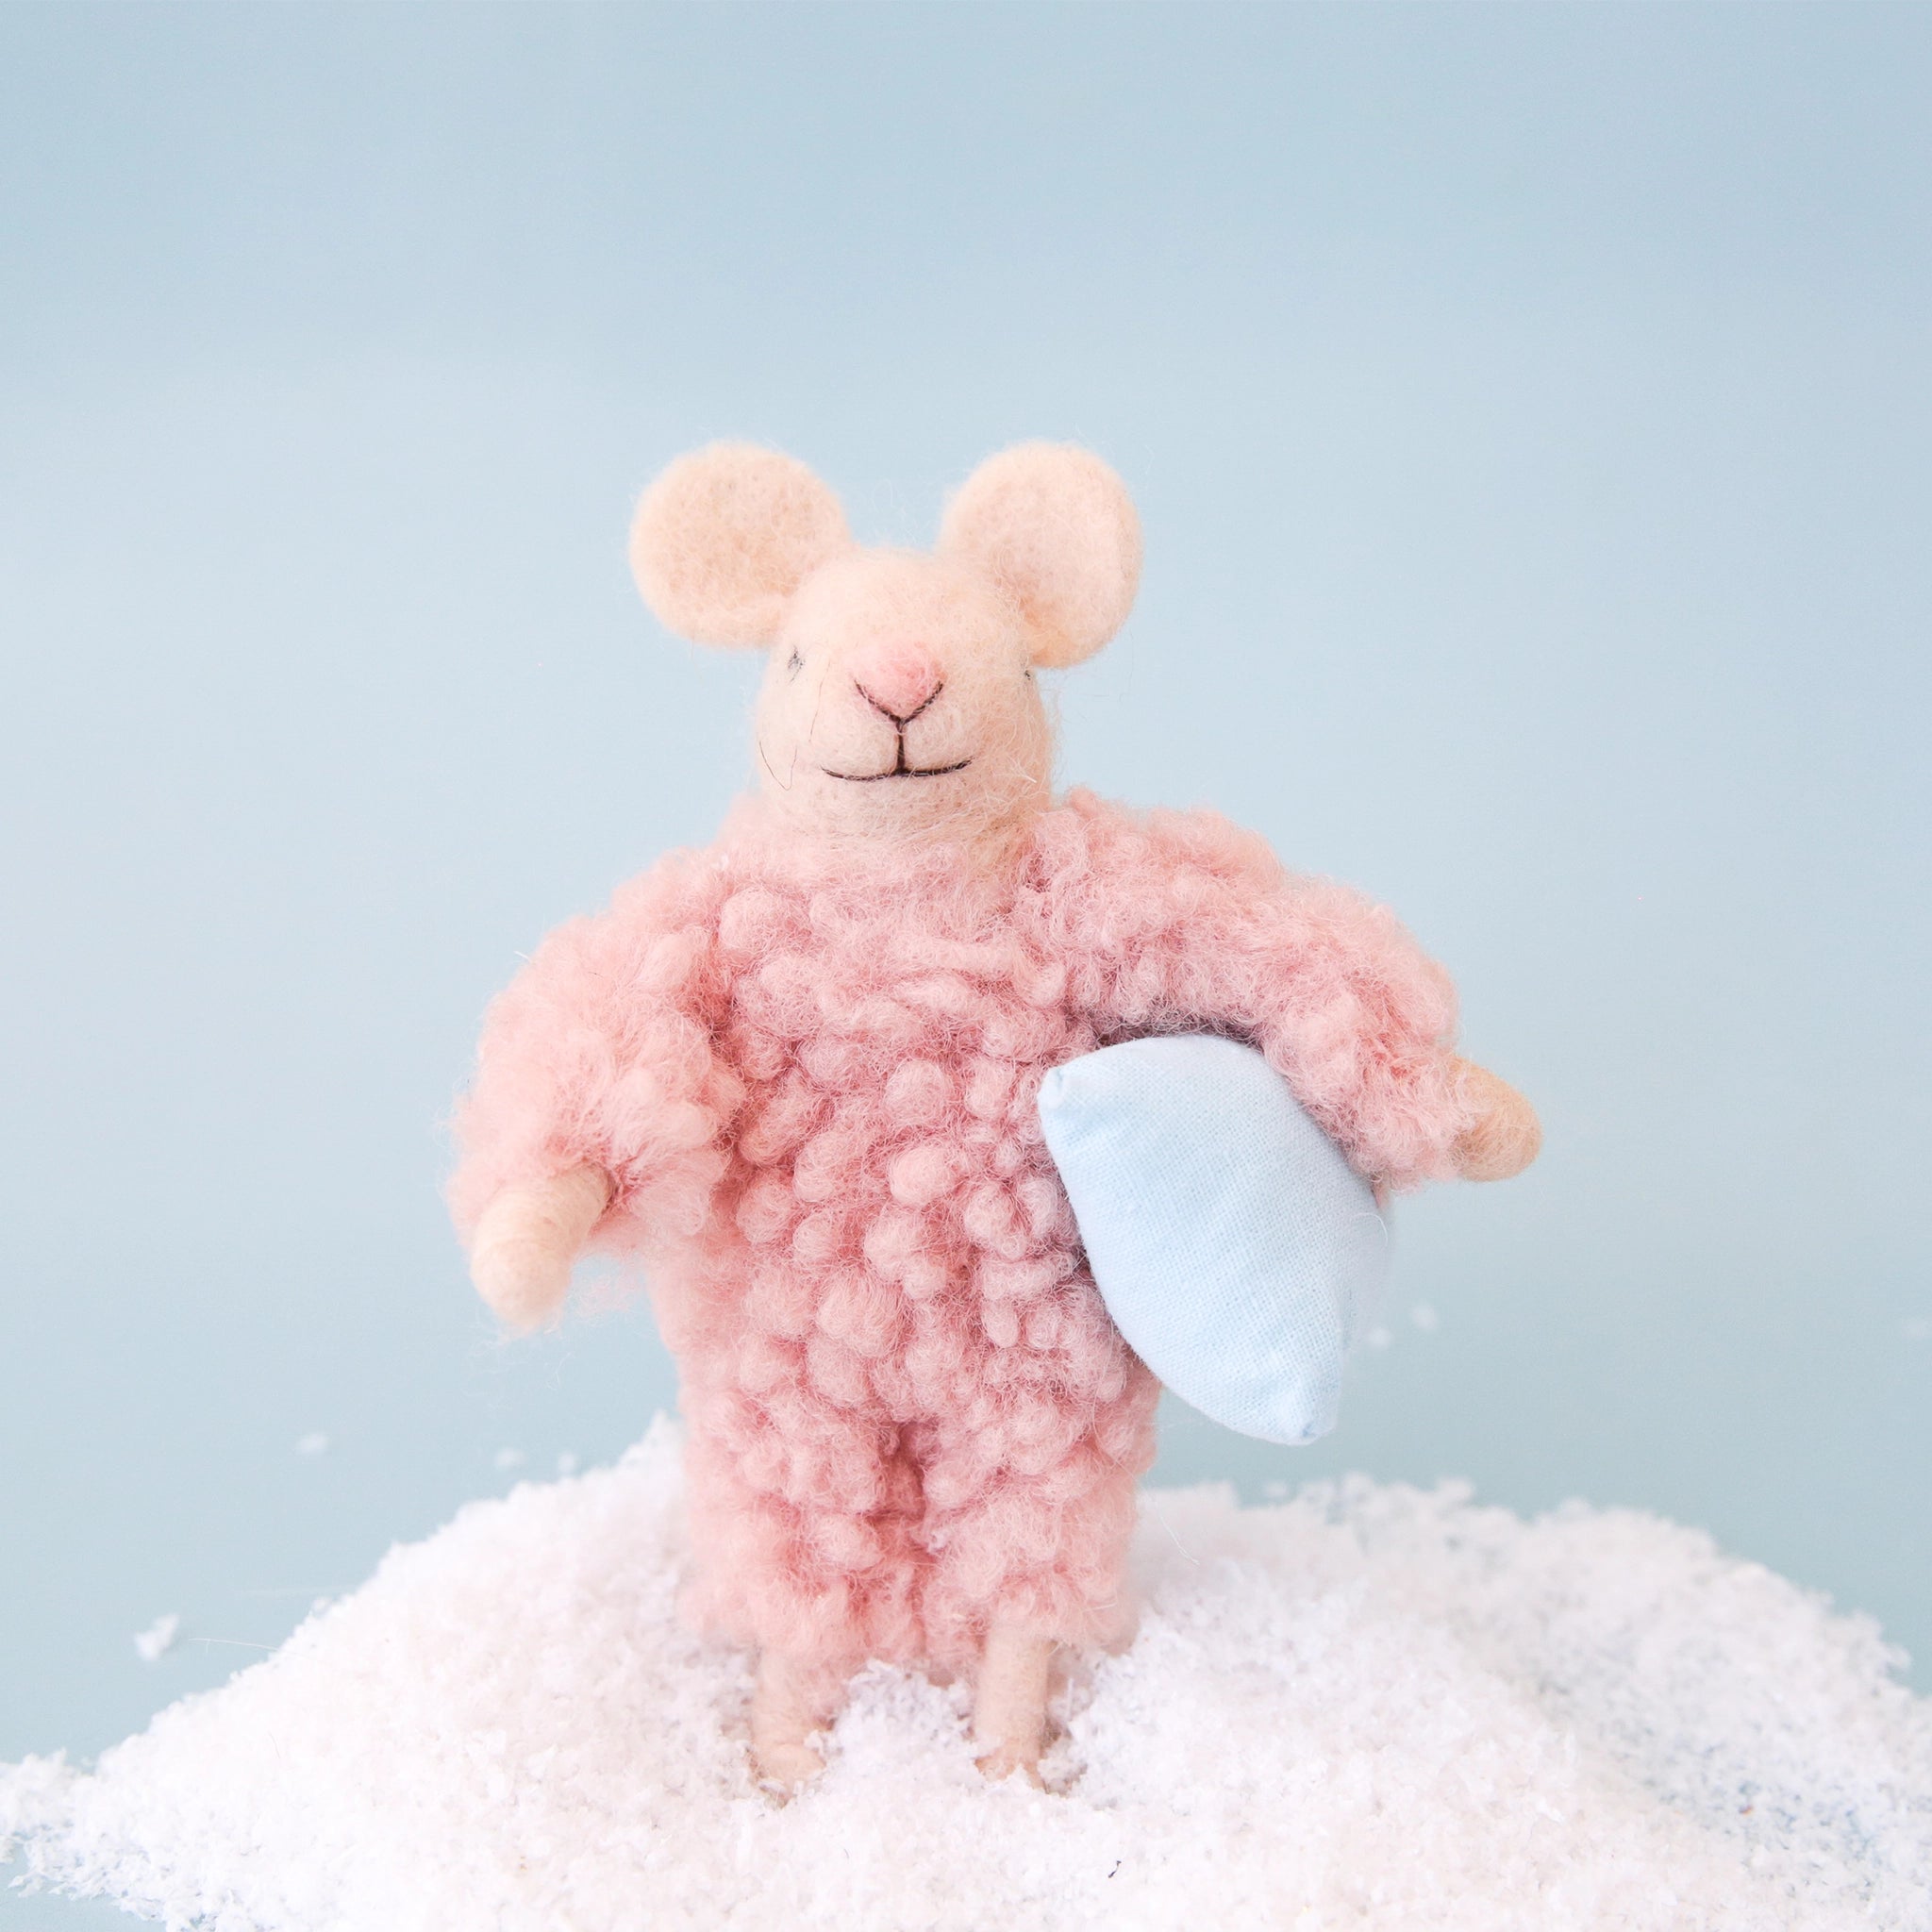 On a blue background is a felt mouse ornament in a cream shade with a fuzzy pink jumpsuit on and holding a pillow. 